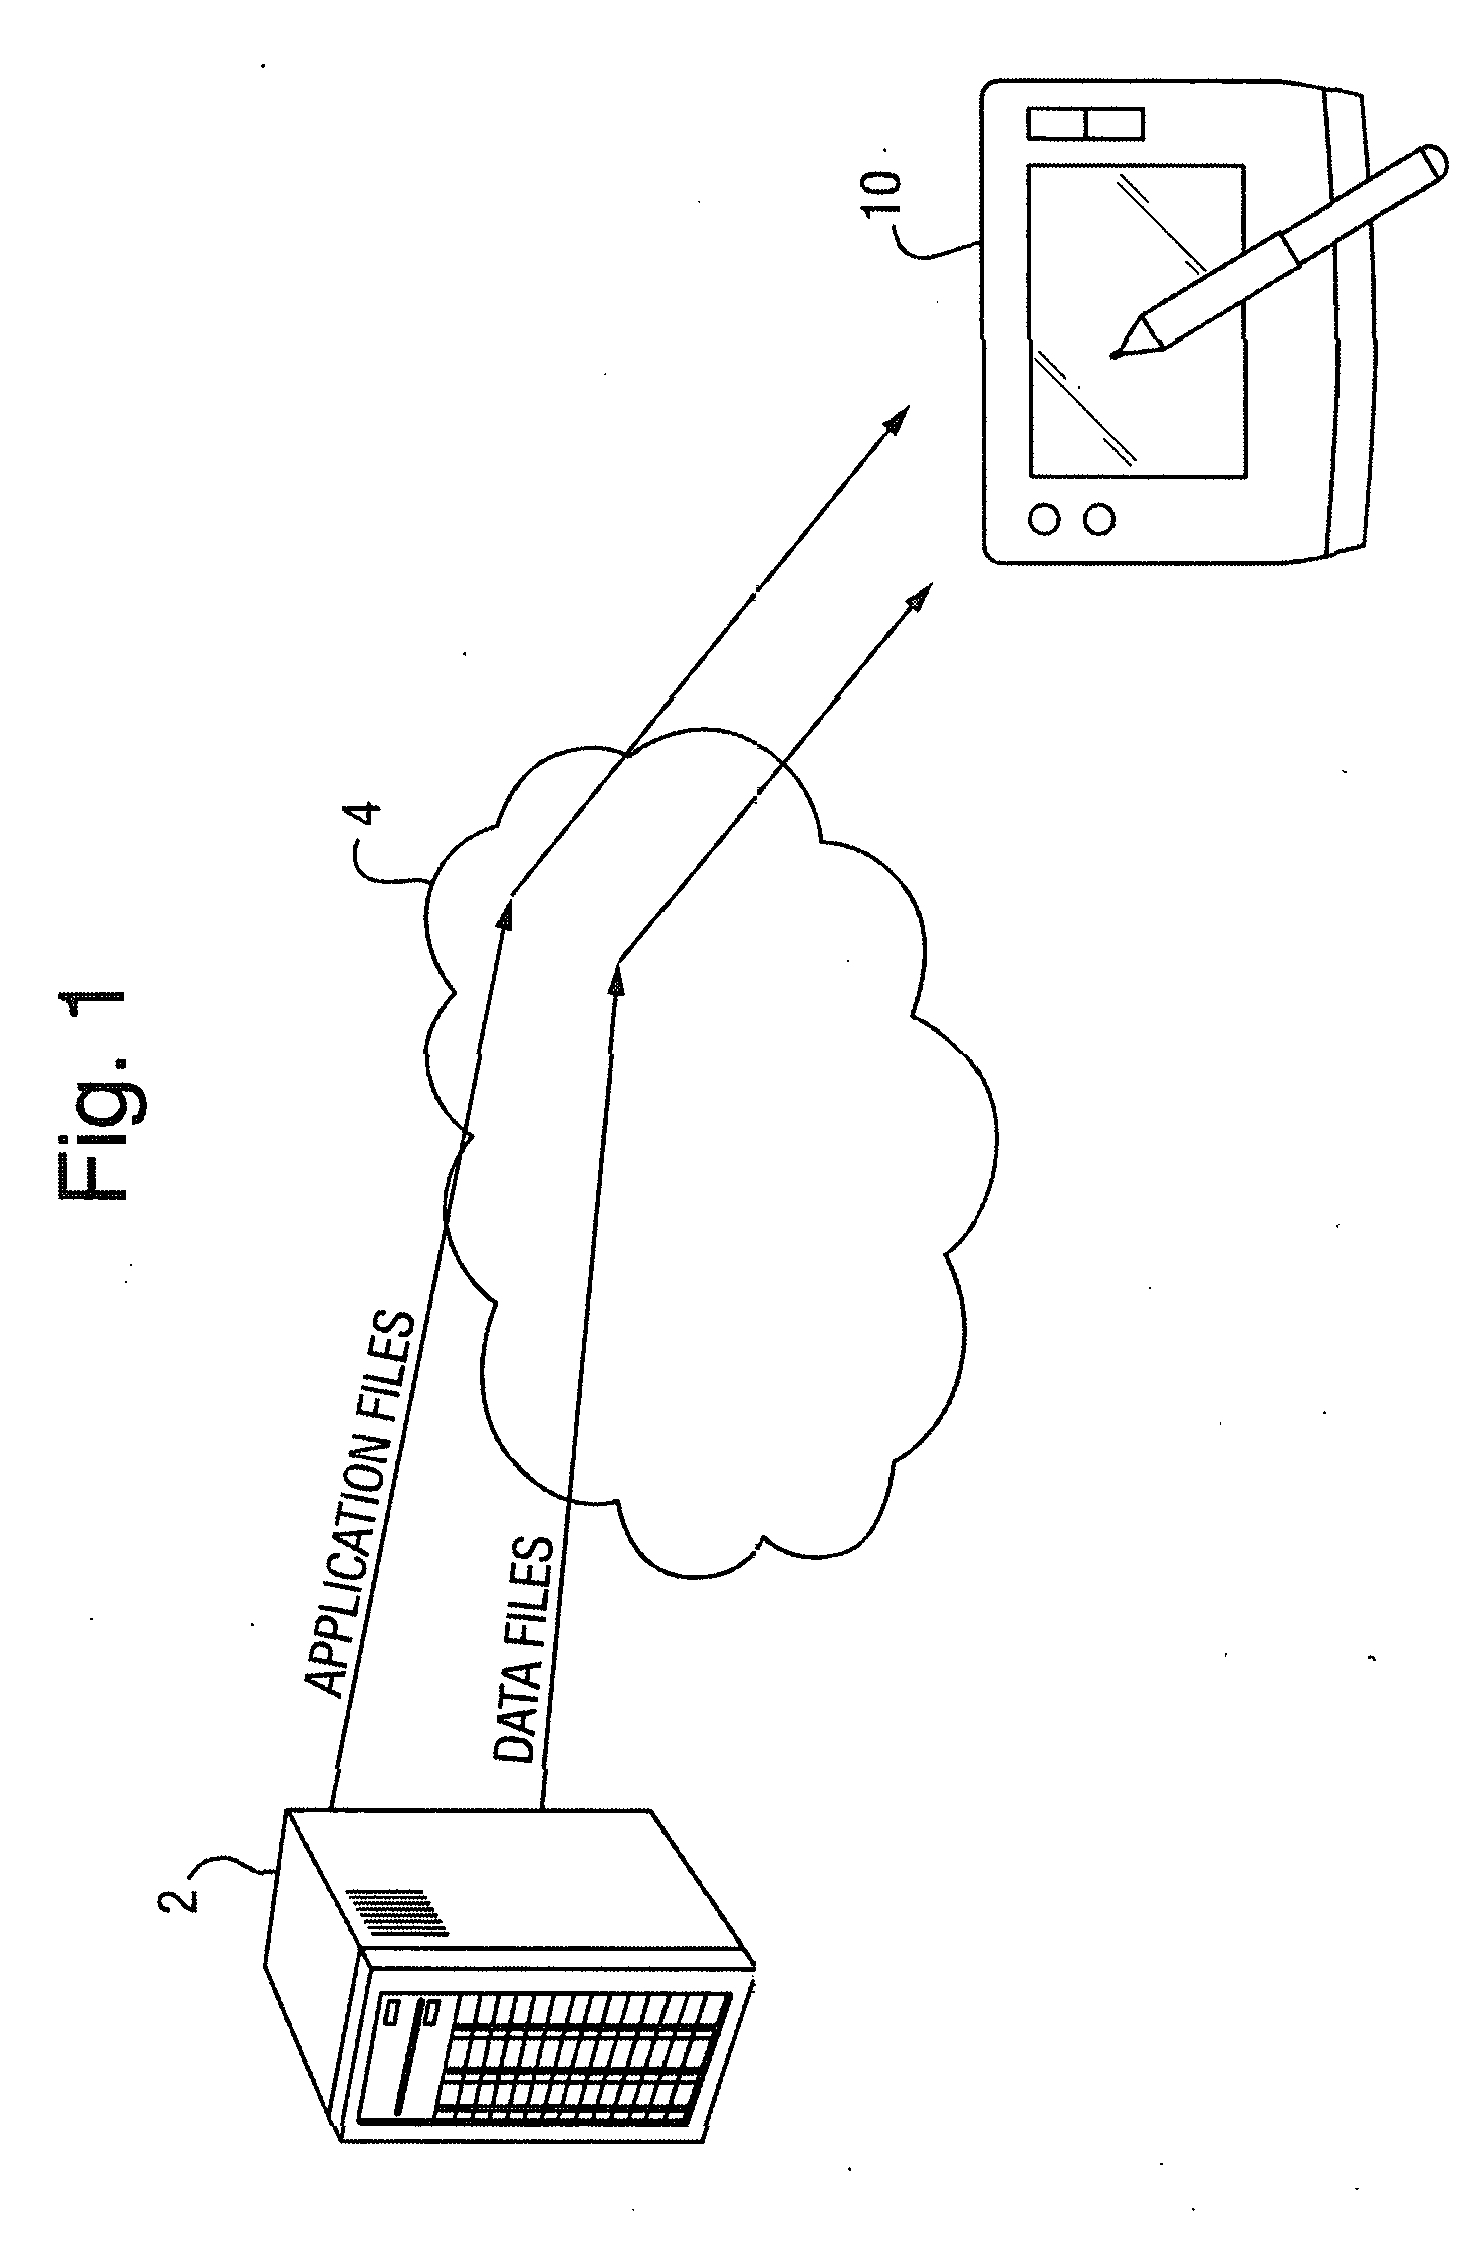 Processing device and method of operation thereof